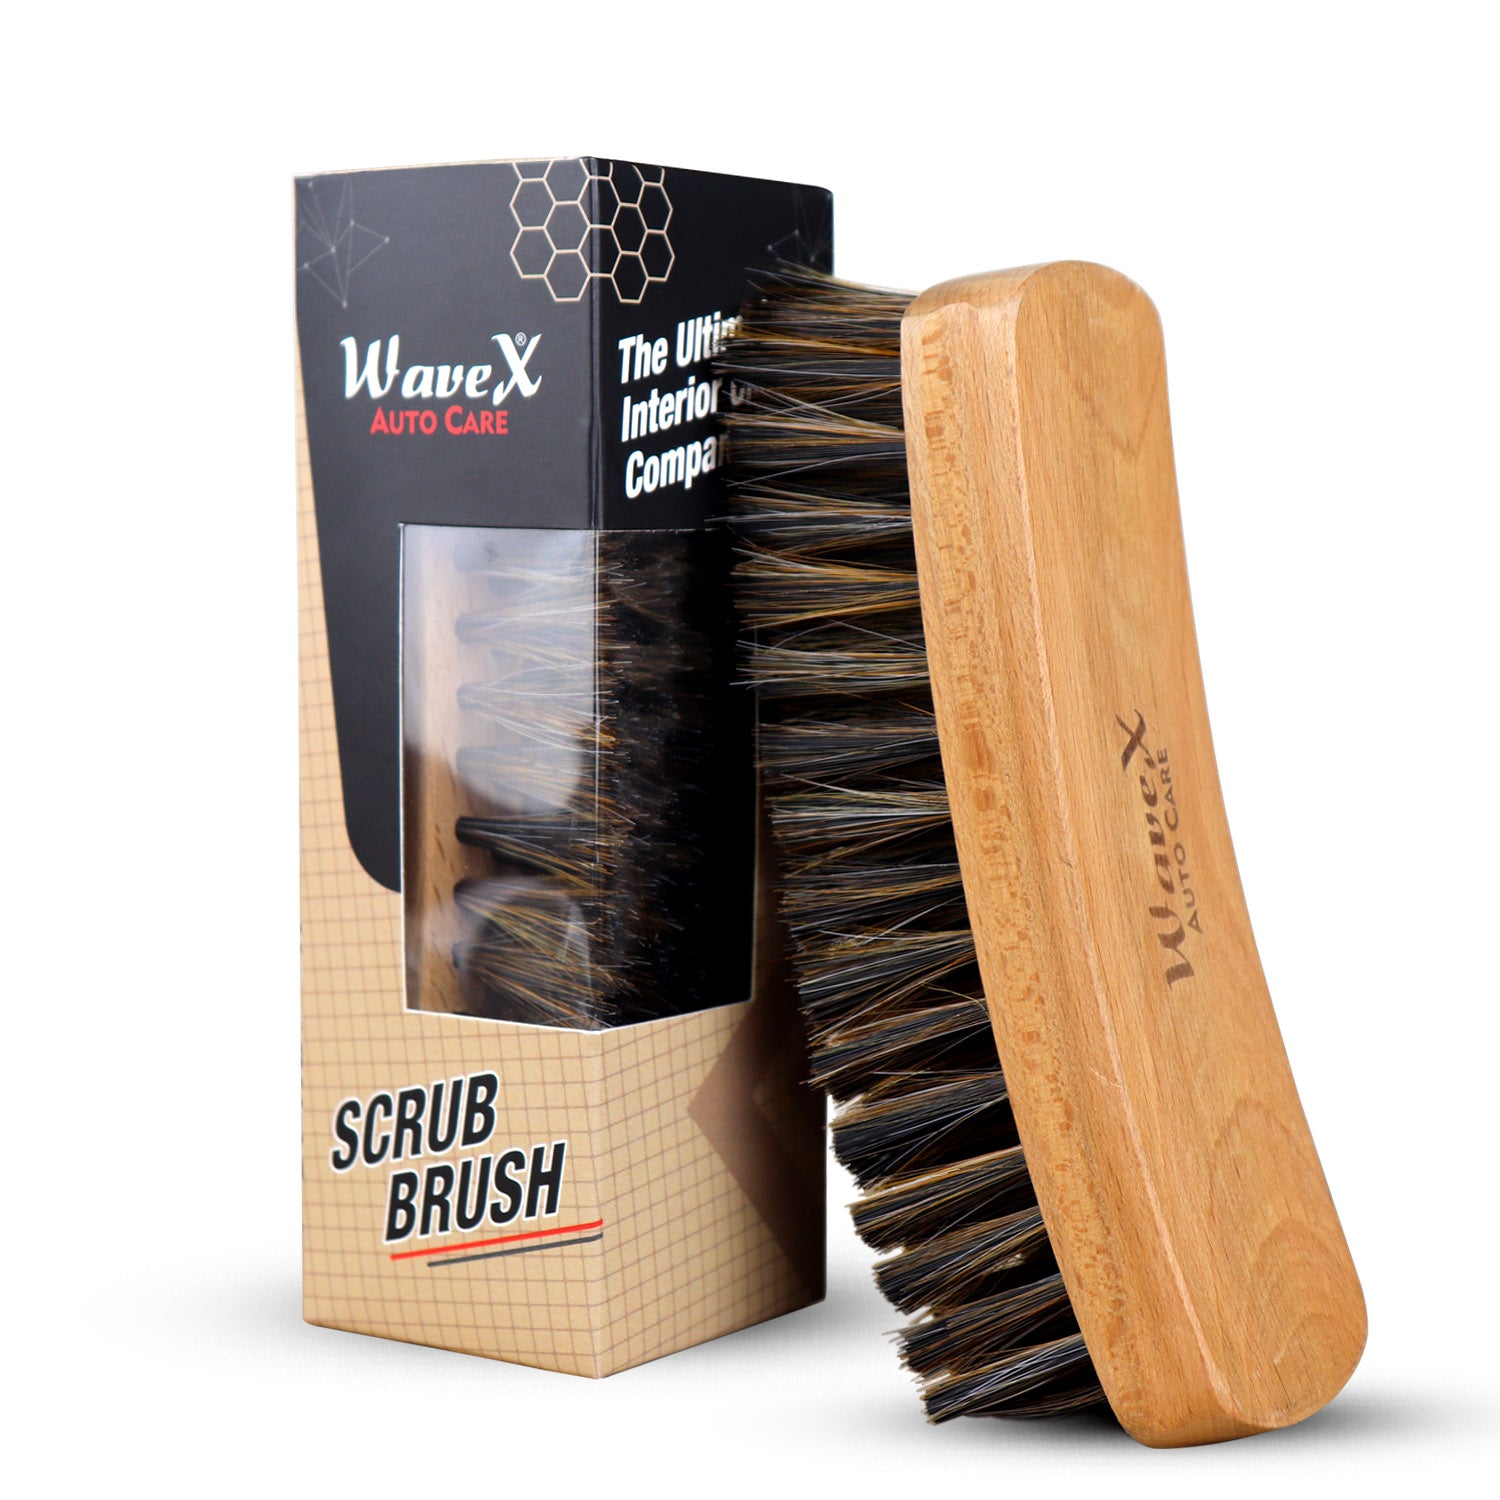 Wavex Car Cleaning Brush | Works Dry and Wet with Car Interior Cleaner Liquid, Car Seat Cleaner | Also Acts as Interior Car Duster